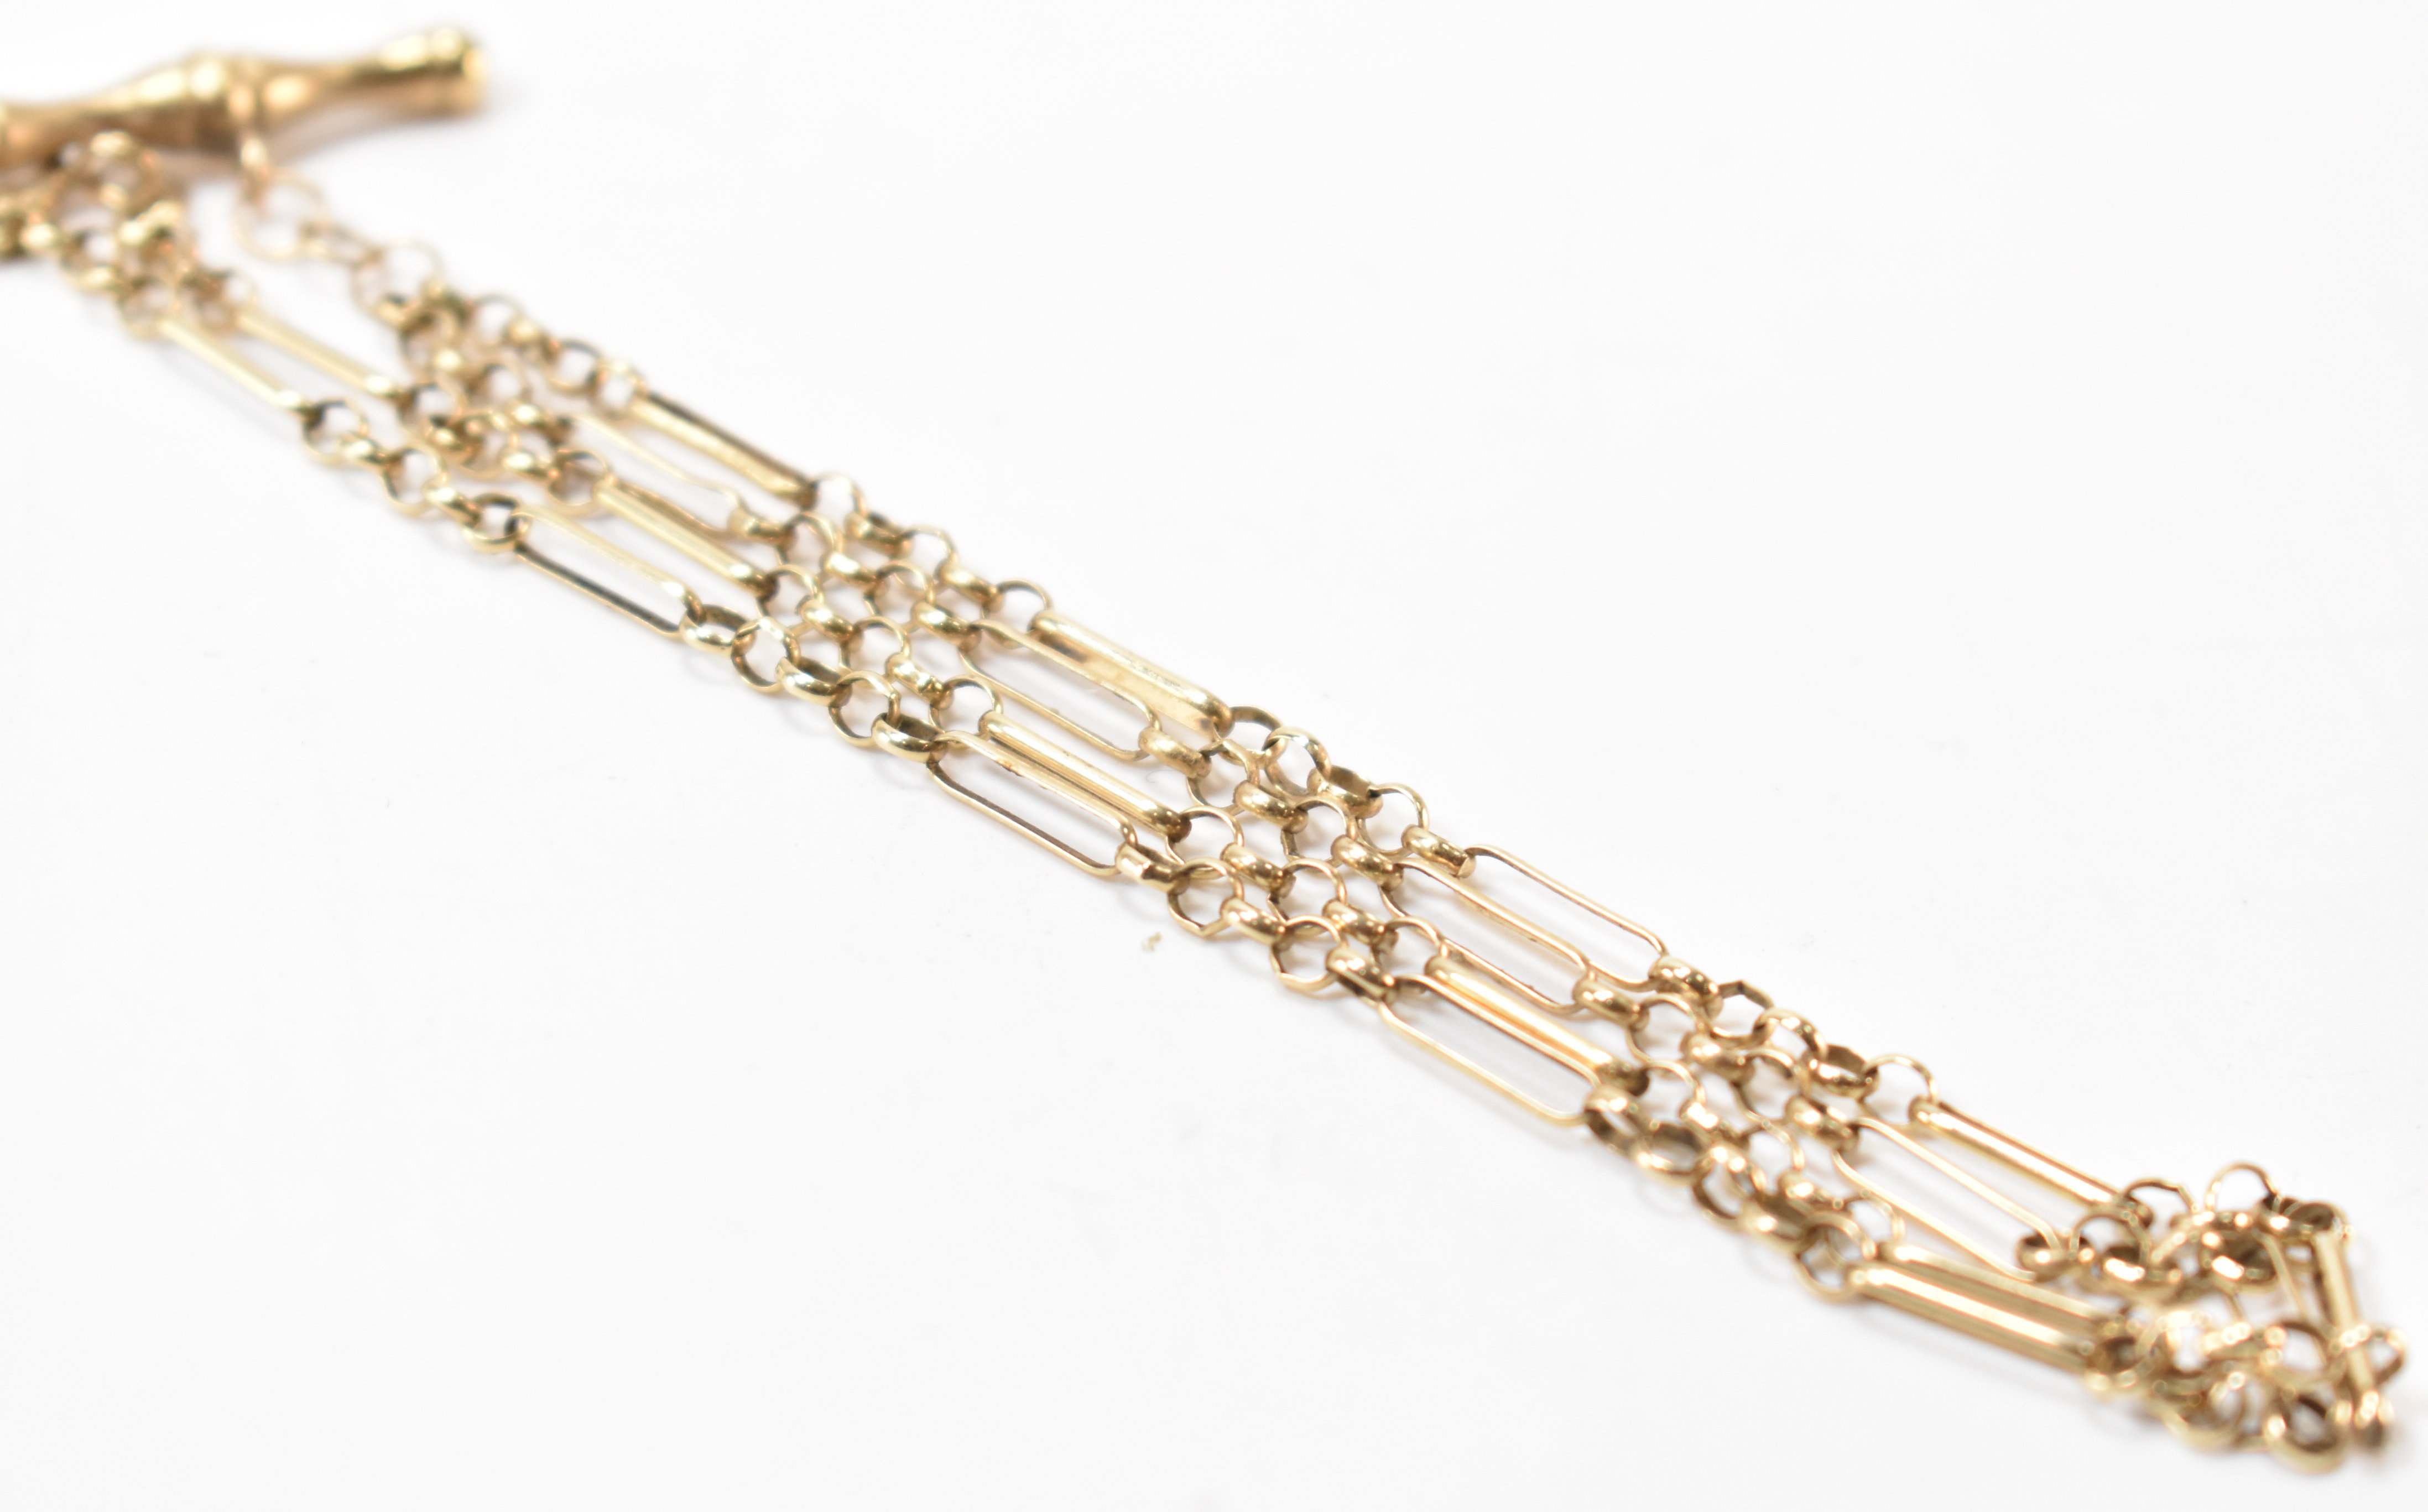 VINTAGE GOLD NECKLACE CHAIN WITH T BAR PENDANT - Image 3 of 4